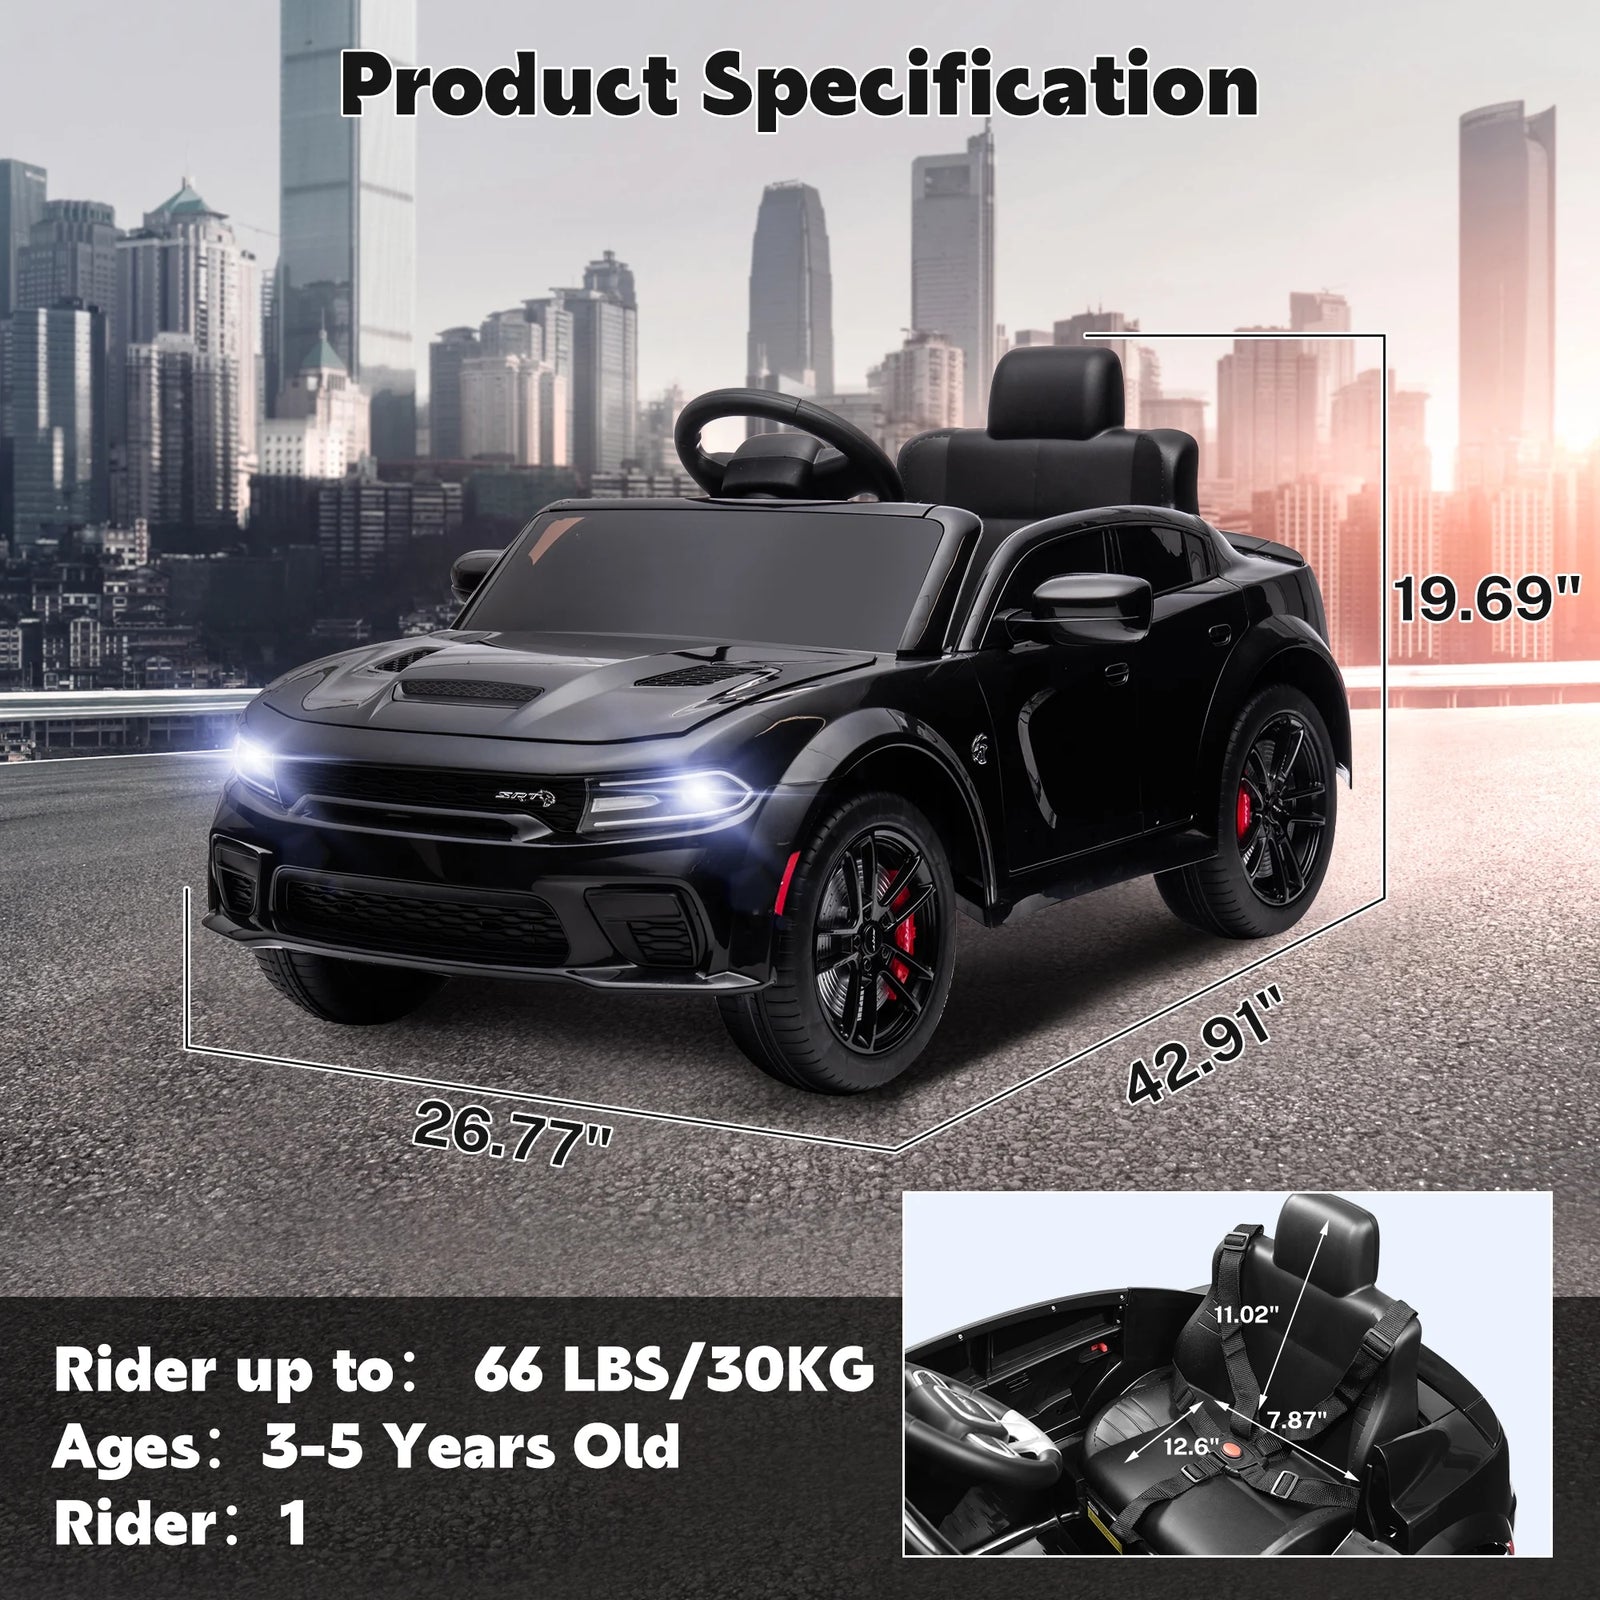 Dodge Electric Ride on Cars for Kids, 12 V Licensed Dodge Charger SRT Powered Ride on Toys Cars with Parent Remote Control, Electric Car for Girls 3-5 W/Music Player/Led Headlights/Safety Belt, Black